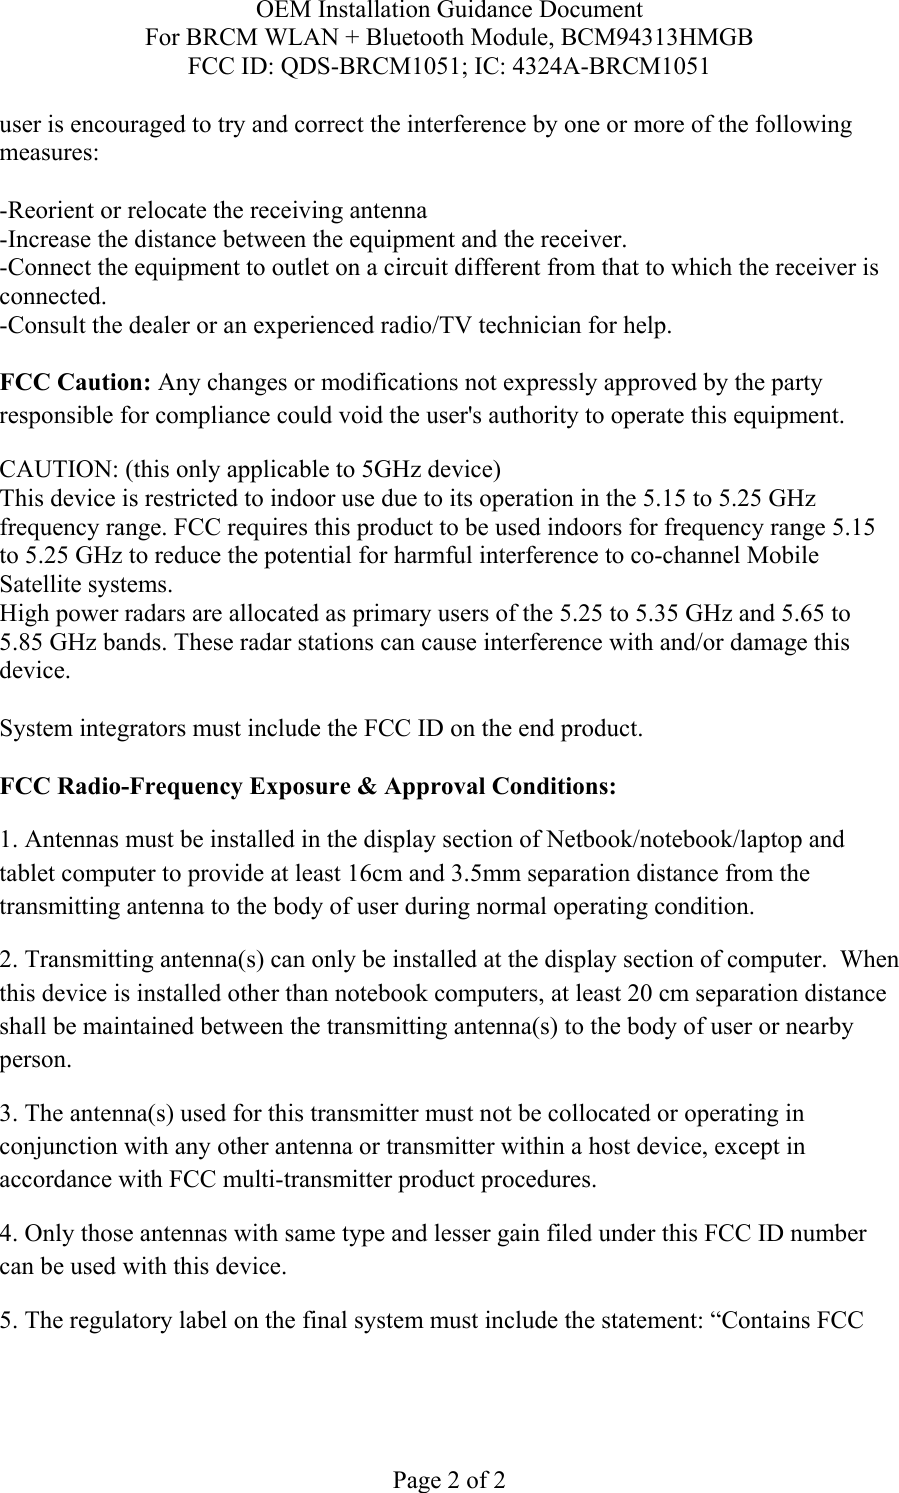 OEM Installation Guidance Document For BRCM WLAN + Bluetooth Module, BCM94313HMGB FCC ID: QDS-BRCM1051; IC: 4324A-BRCM1051  Page 2 of 2 user is encouraged to try and correct the interference by one or more of the following measures:   -Reorient or relocate the receiving antenna -Increase the distance between the equipment and the receiver. -Connect the equipment to outlet on a circuit different from that to which the receiver is connected. -Consult the dealer or an experienced radio/TV technician for help.  FCC Caution: Any changes or modifications not expressly approved by the party responsible for compliance could void the user&apos;s authority to operate this equipment. CAUTION: (this only applicable to 5GHz device) This device is restricted to indoor use due to its operation in the 5.15 to 5.25 GHz frequency range. FCC requires this product to be used indoors for frequency range 5.15 to 5.25 GHz to reduce the potential for harmful interference to co-channel Mobile Satellite systems. High power radars are allocated as primary users of the 5.25 to 5.35 GHz and 5.65 to 5.85 GHz bands. These radar stations can cause interference with and/or damage this device.  System integrators must include the FCC ID on the end product.   FCC Radio-Frequency Exposure &amp; Approval Conditions: 1. Antennas must be installed in the display section of Netbook/notebook/laptop and tablet computer to provide at least 16cm and 3.5mm separation distance from the transmitting antenna to the body of user during normal operating condition. 2. Transmitting antenna(s) can only be installed at the display section of computer.  When this device is installed other than notebook computers, at least 20 cm separation distance shall be maintained between the transmitting antenna(s) to the body of user or nearby person. 3. The antenna(s) used for this transmitter must not be collocated or operating in conjunction with any other antenna or transmitter within a host device, except in accordance with FCC multi-transmitter product procedures. 4. Only those antennas with same type and lesser gain filed under this FCC ID number can be used with this device. 5. The regulatory label on the final system must include the statement: “Contains FCC 